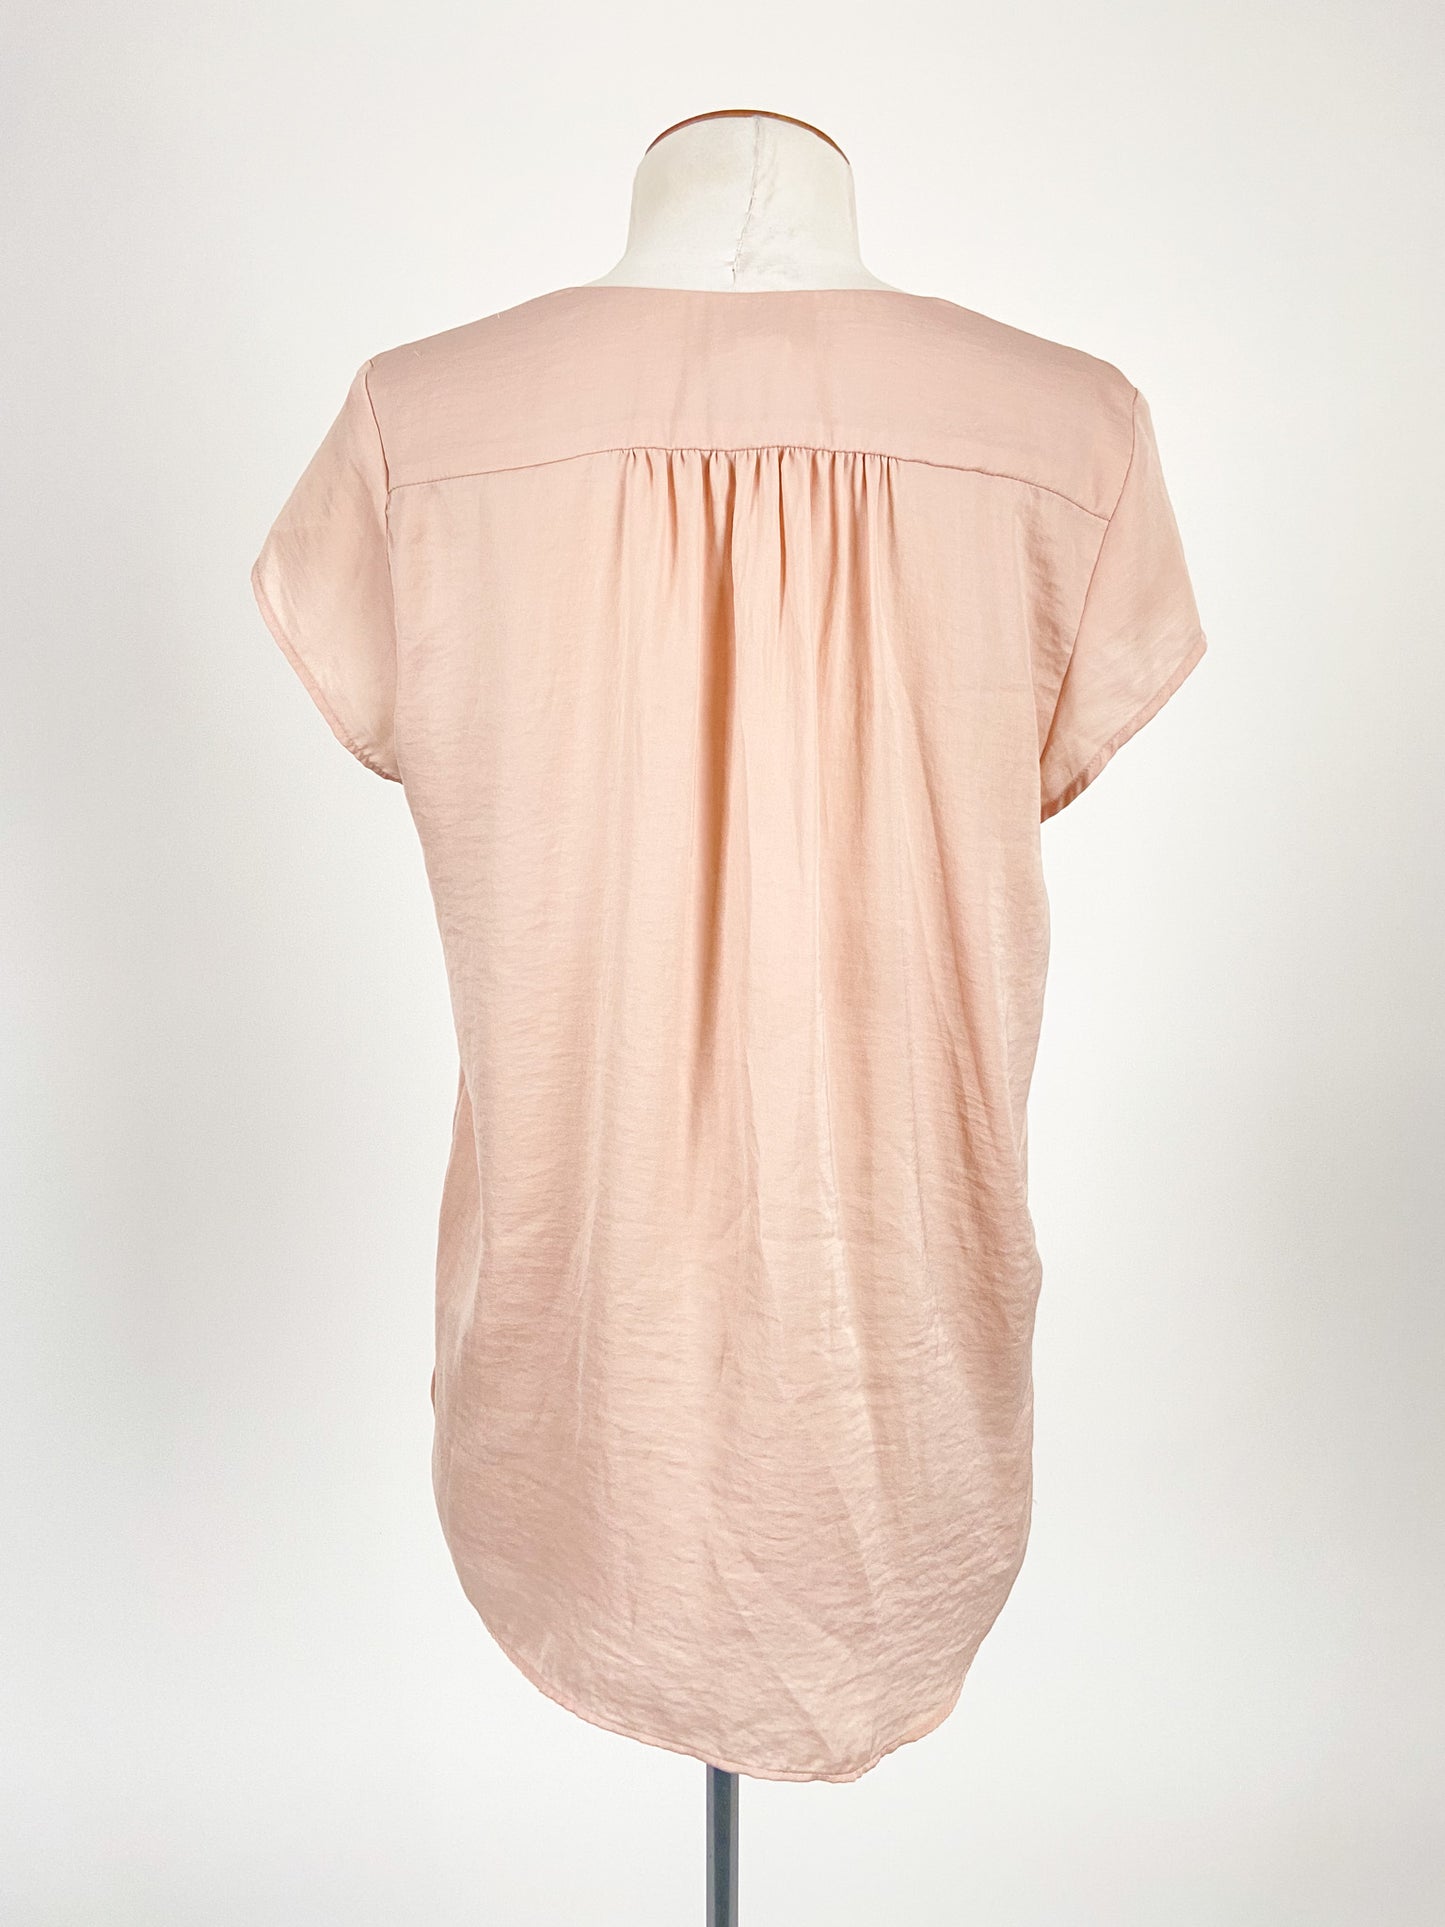 H&M | Pink Casual/Workwear Top | Size XS